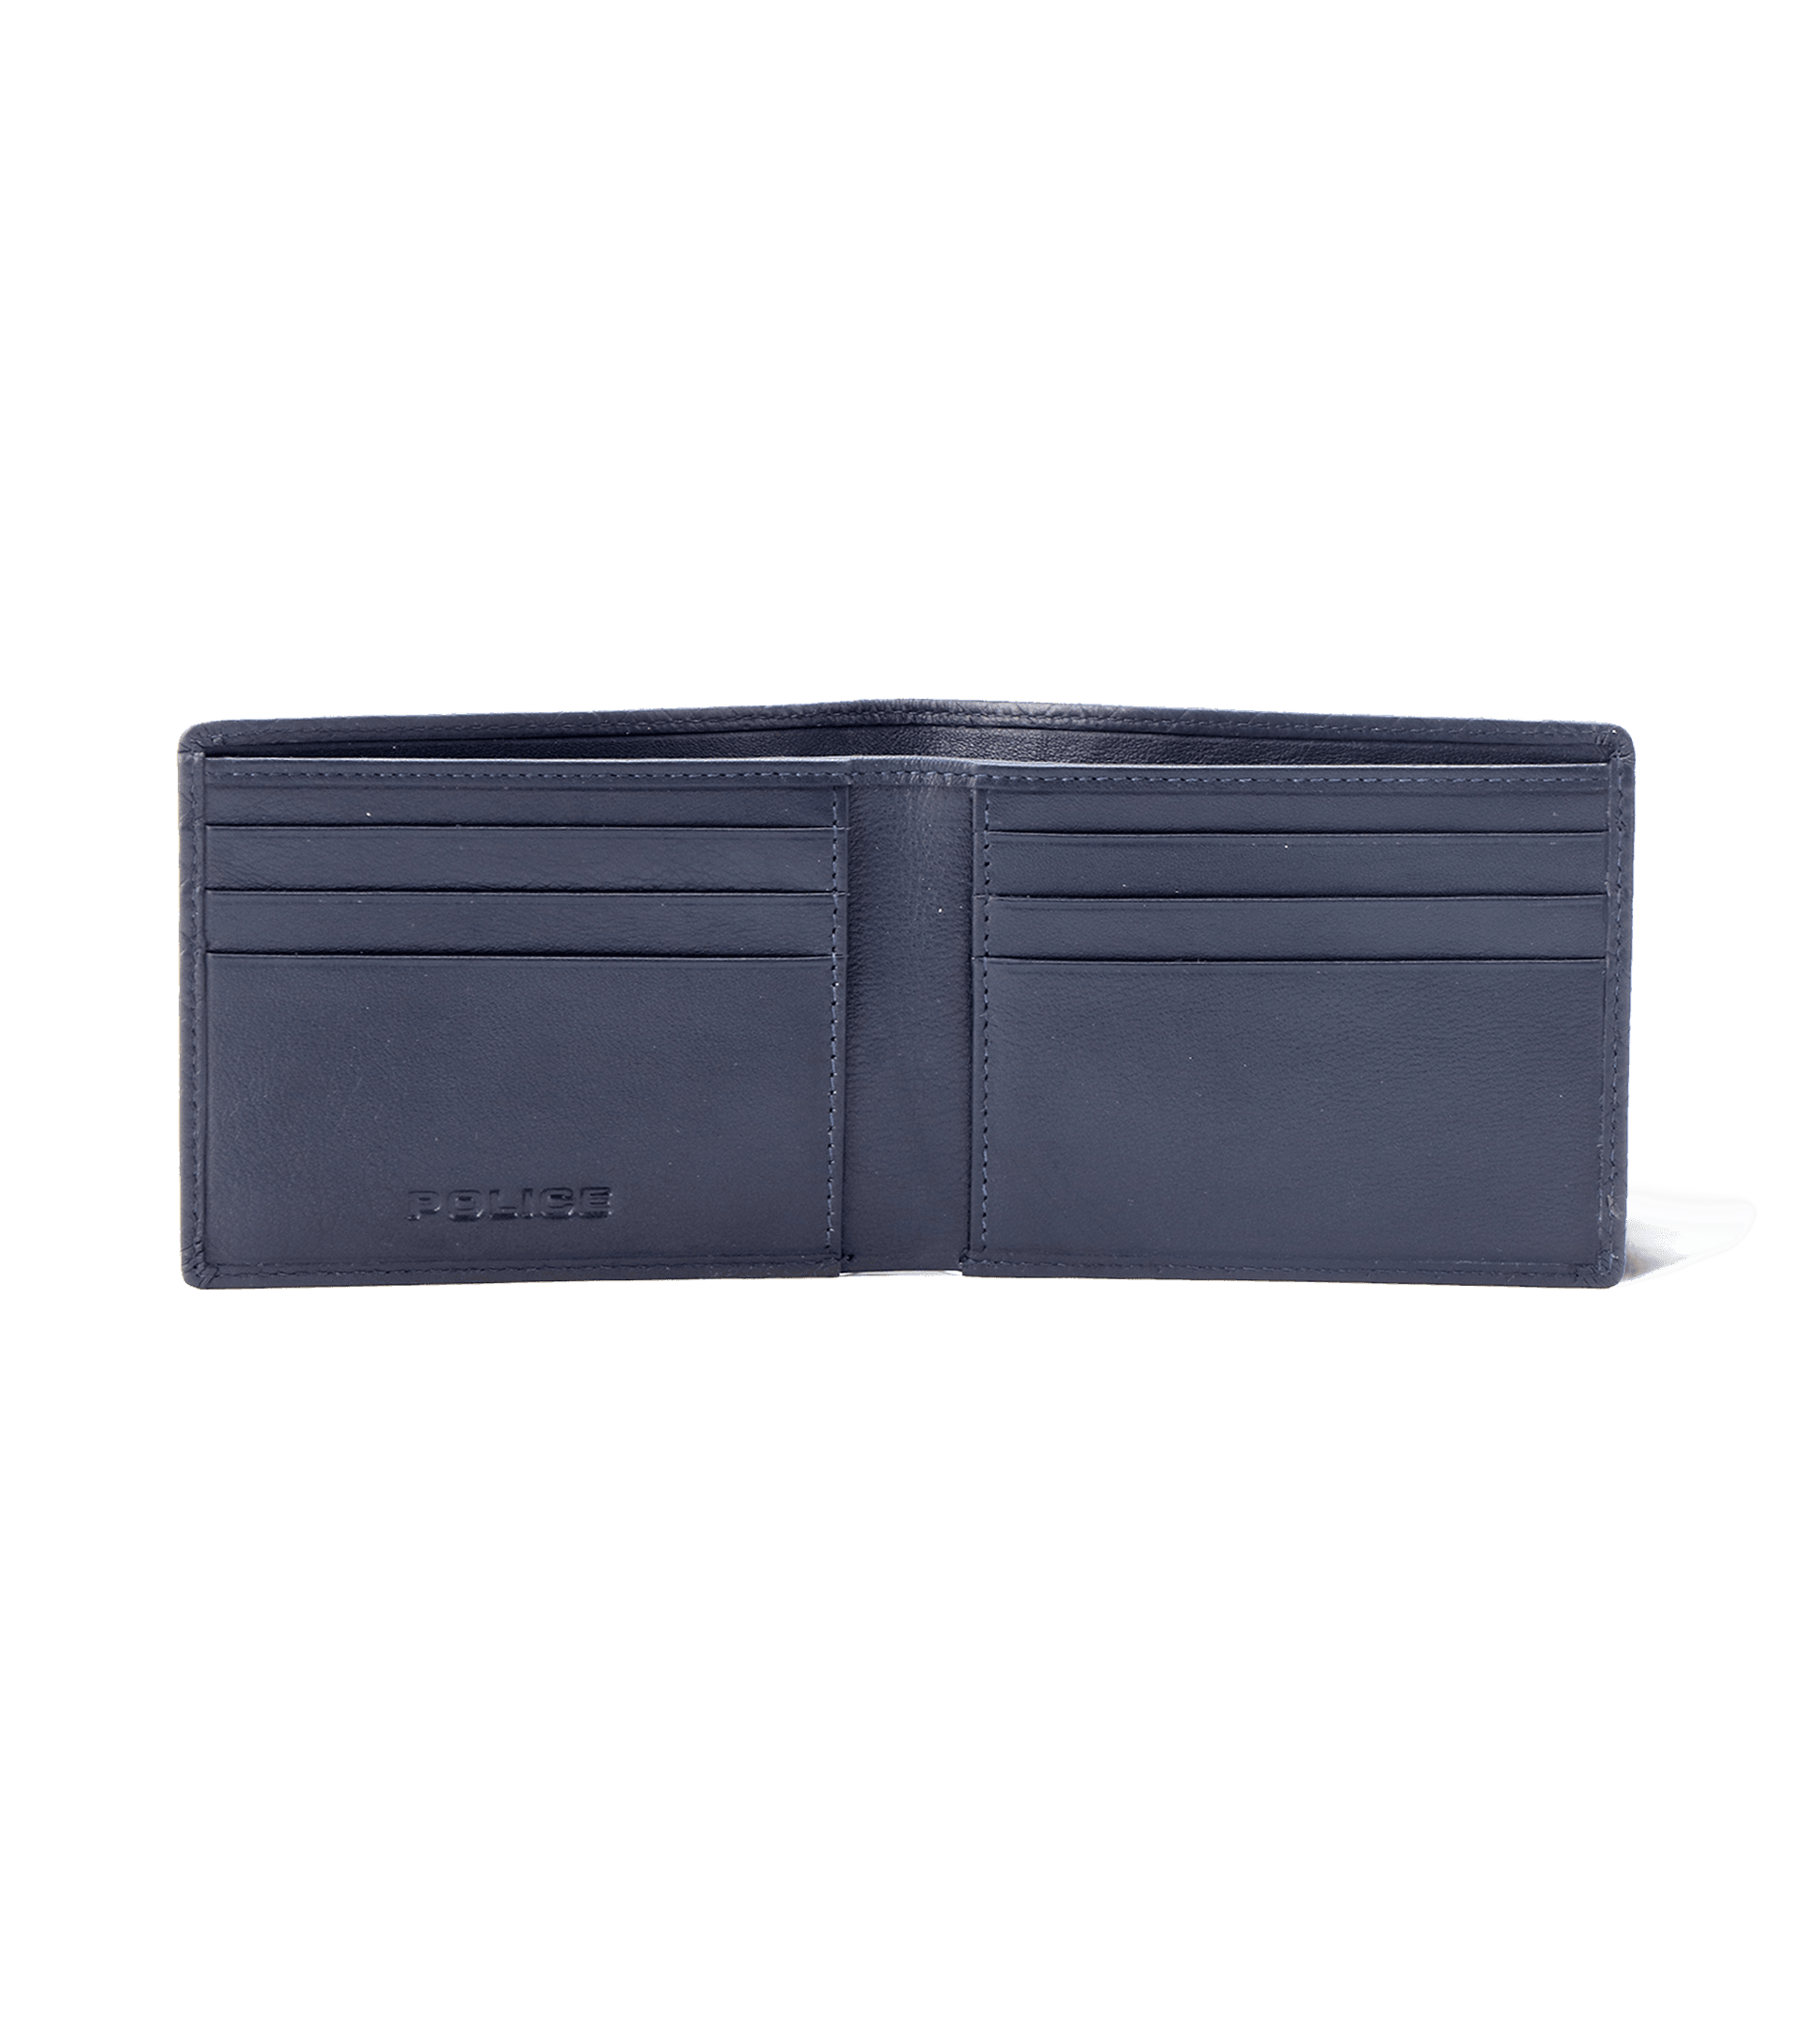 Police leather - Police Edgy Compact Wallet Brown